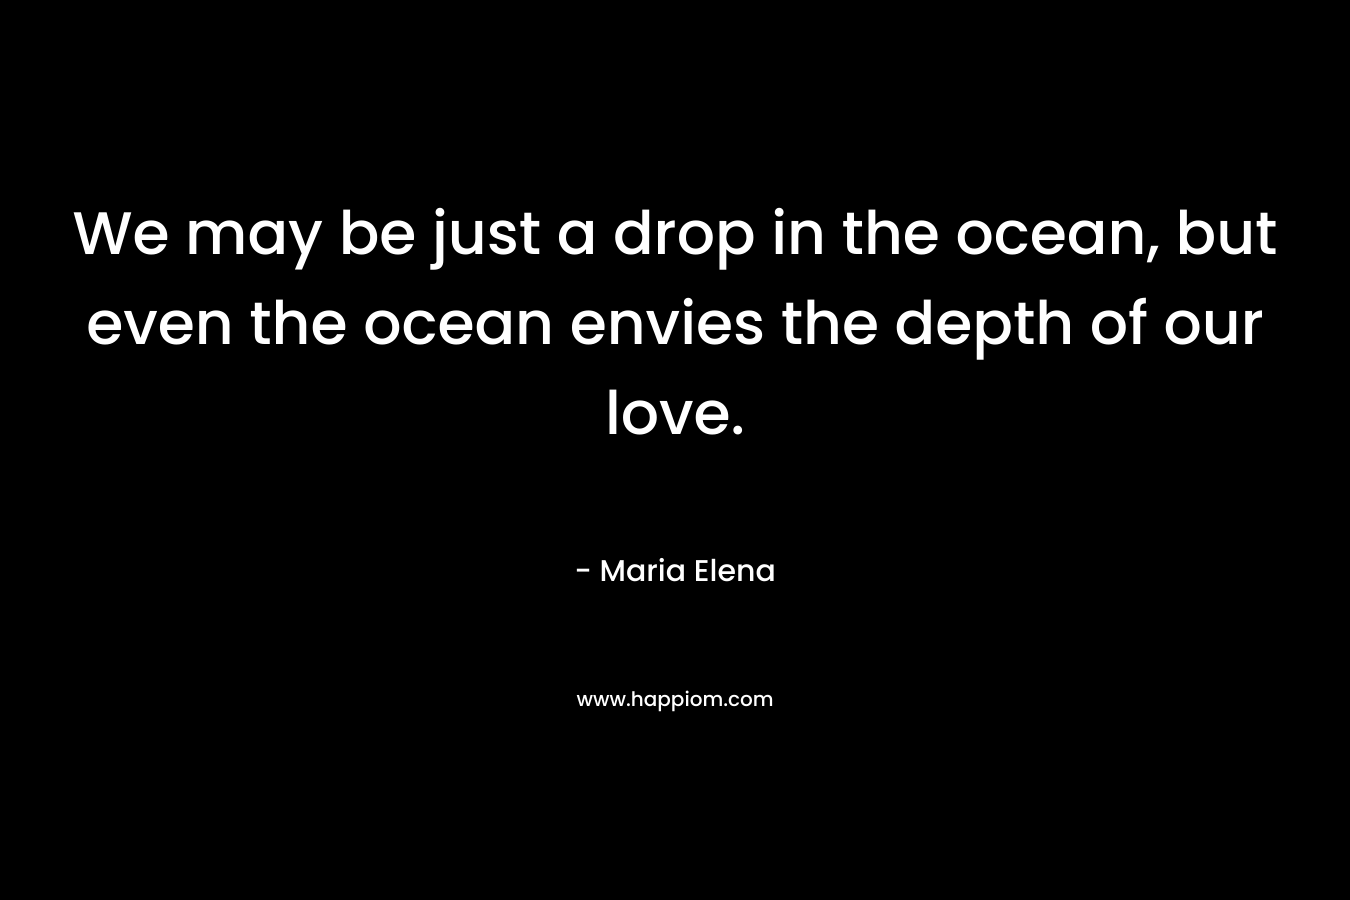 We may be just a drop in the ocean, but even the ocean envies the depth of our love.